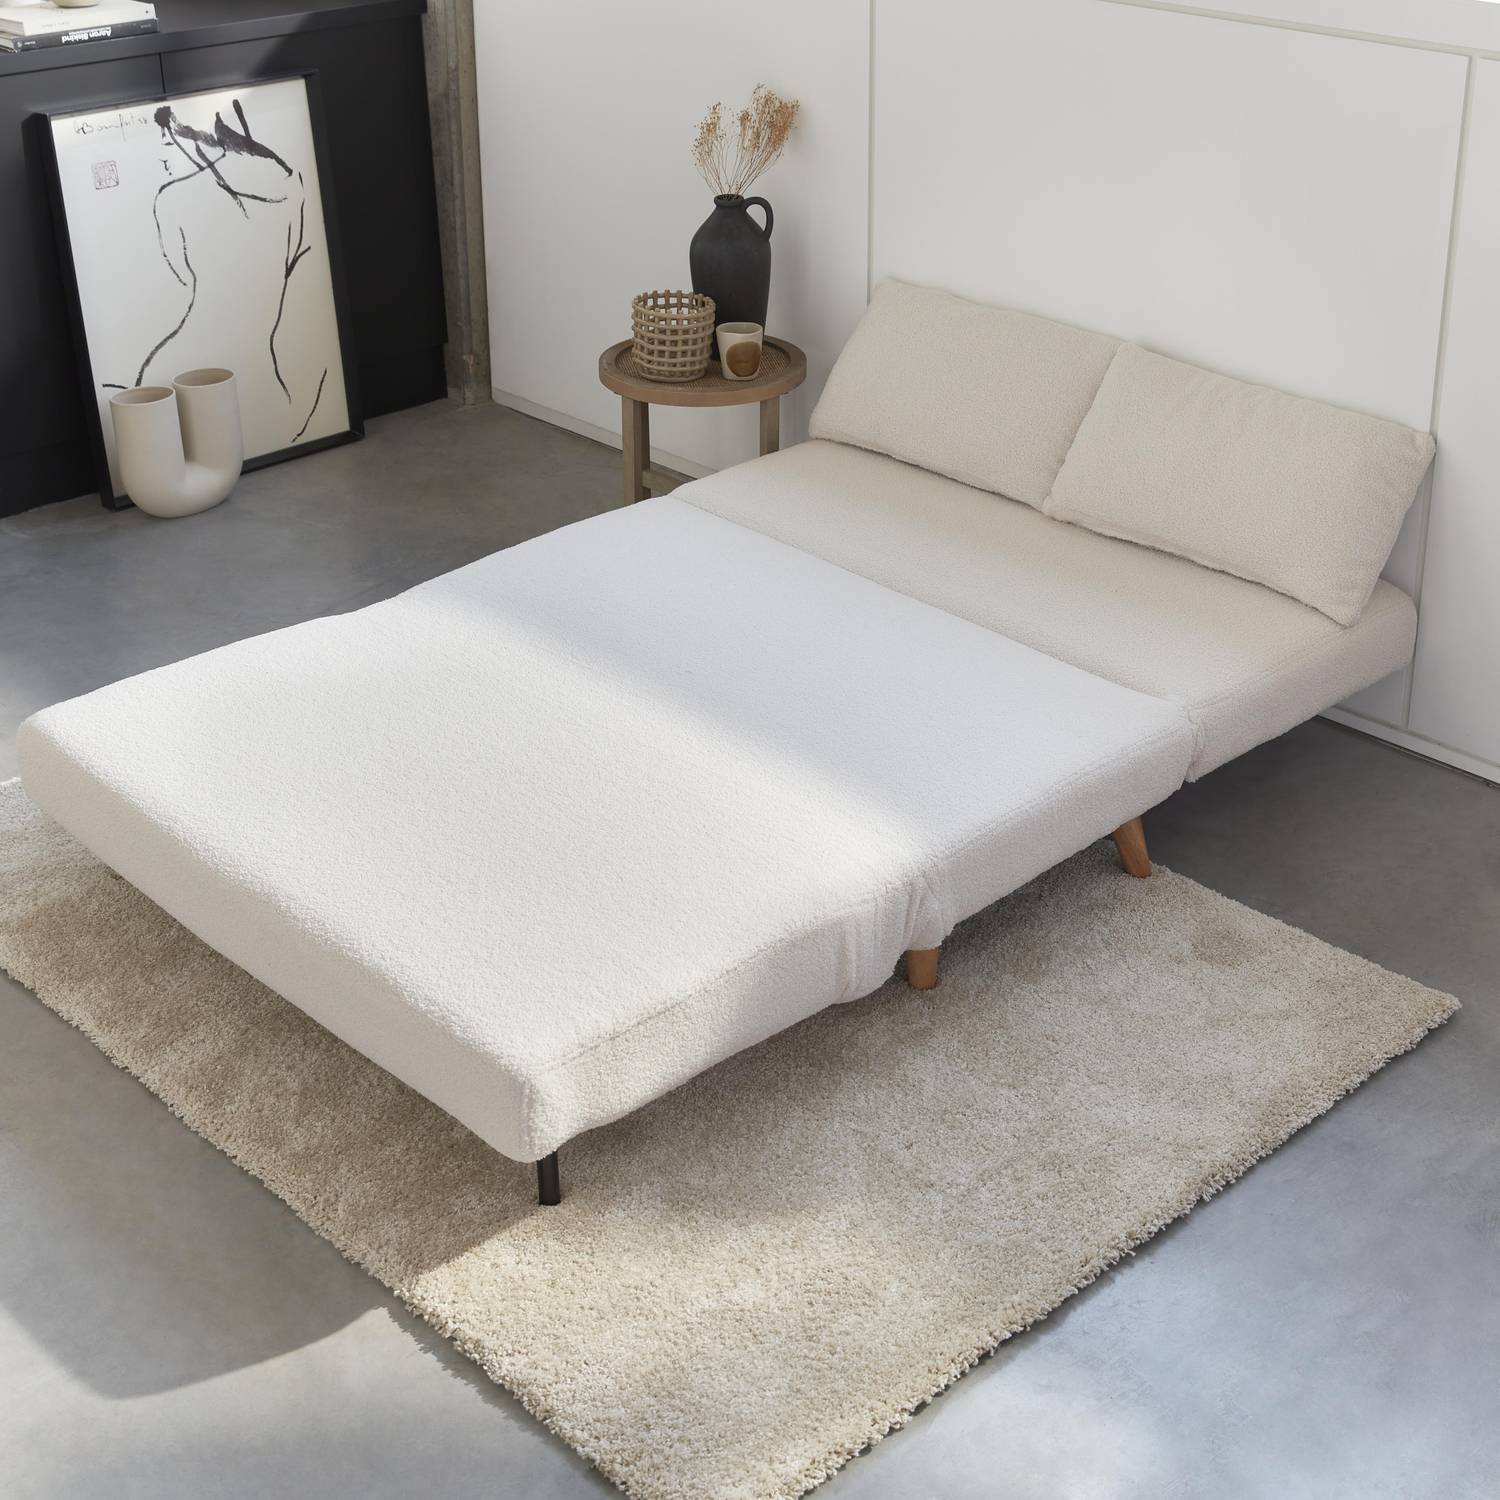 Sleeper, 2-Seater Convertible Sofa with Wooden Legs,  L120xW81xH82cm, white bouclette Photo2